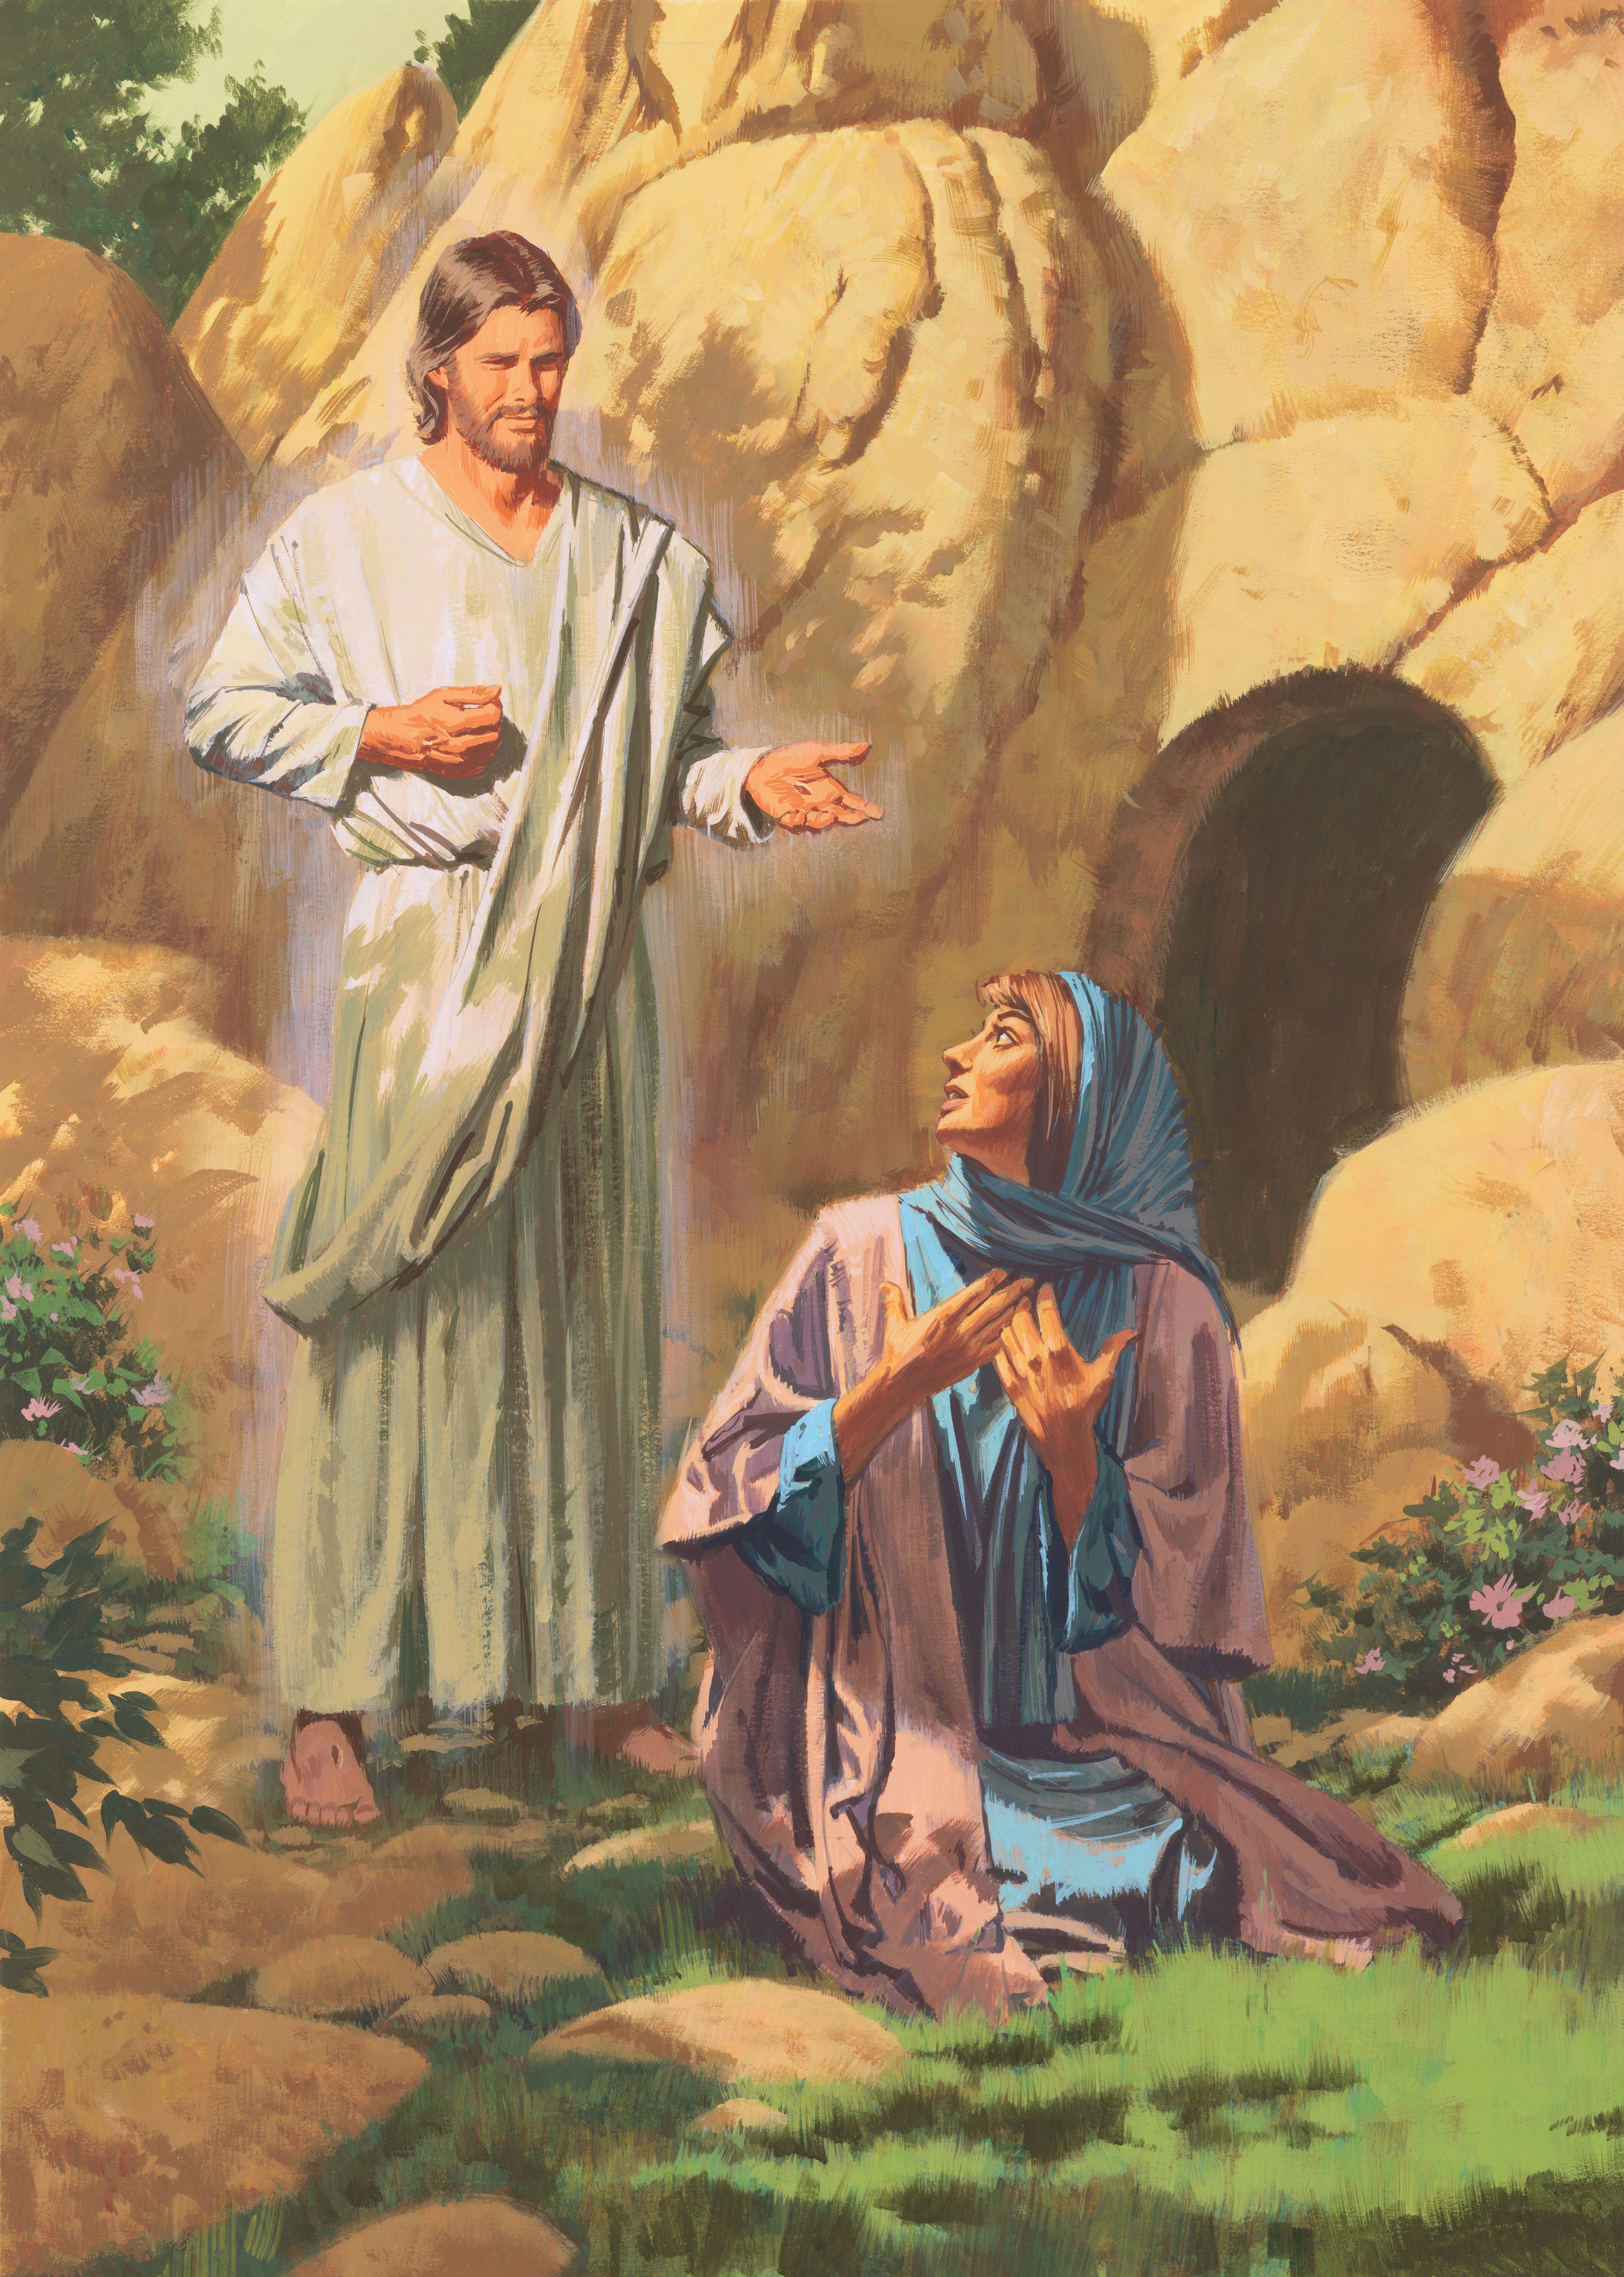 An illustration by Paul Mann showing the resurrected Christ talking to Mary.